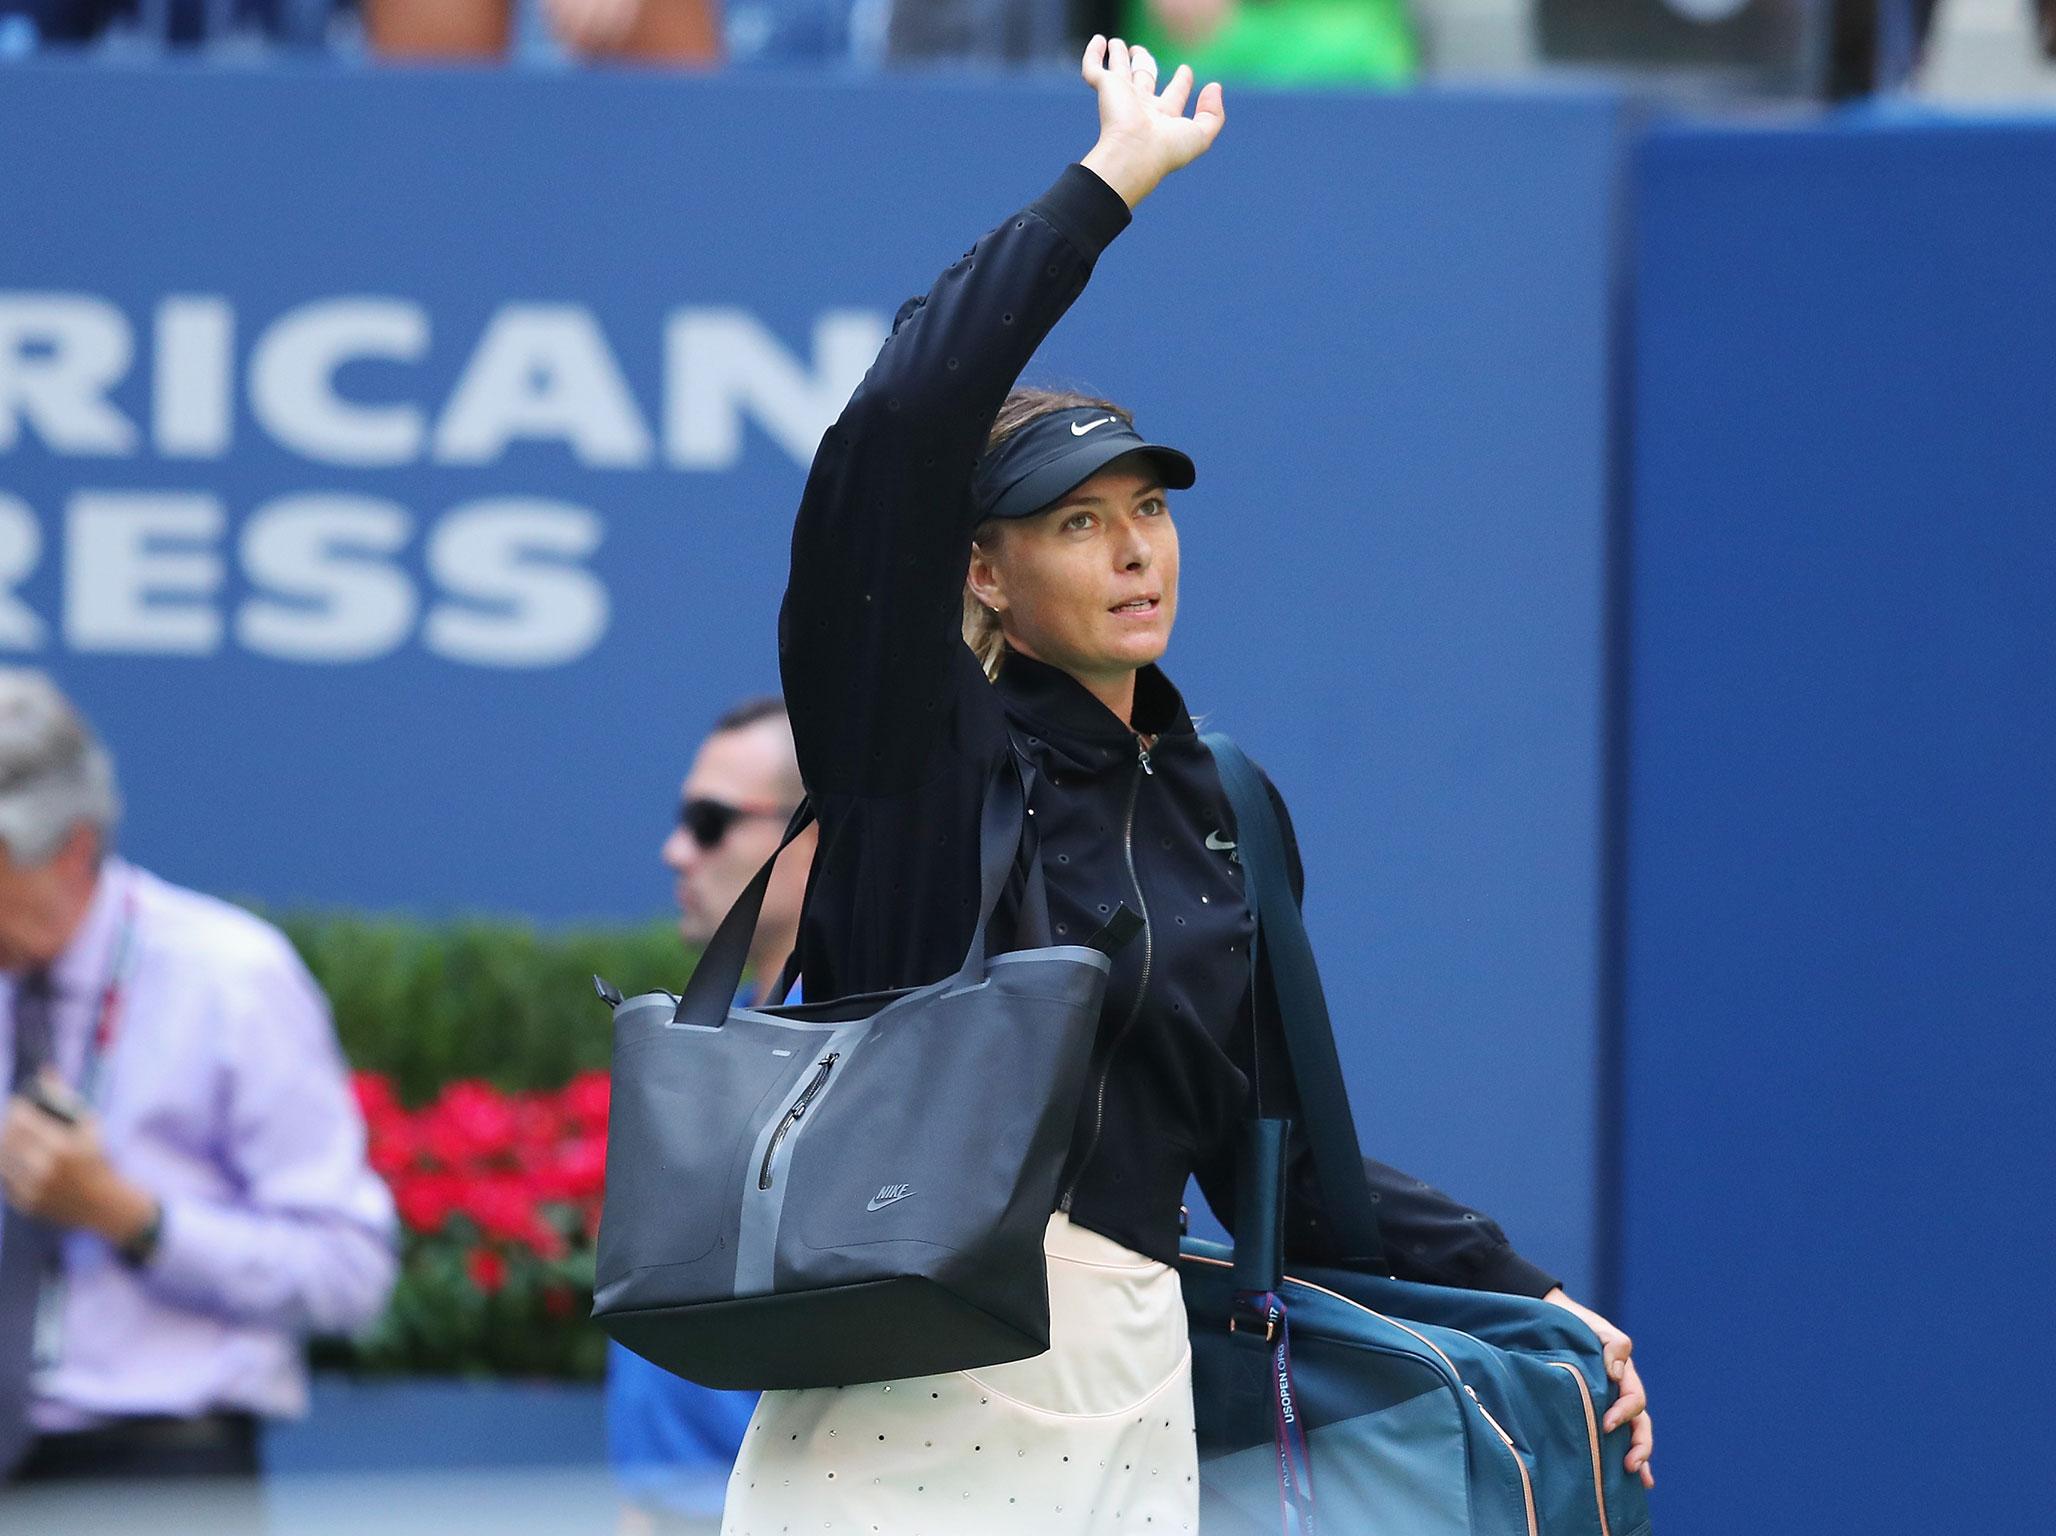 Maria Sharapova bowed out of the women's singles in New York